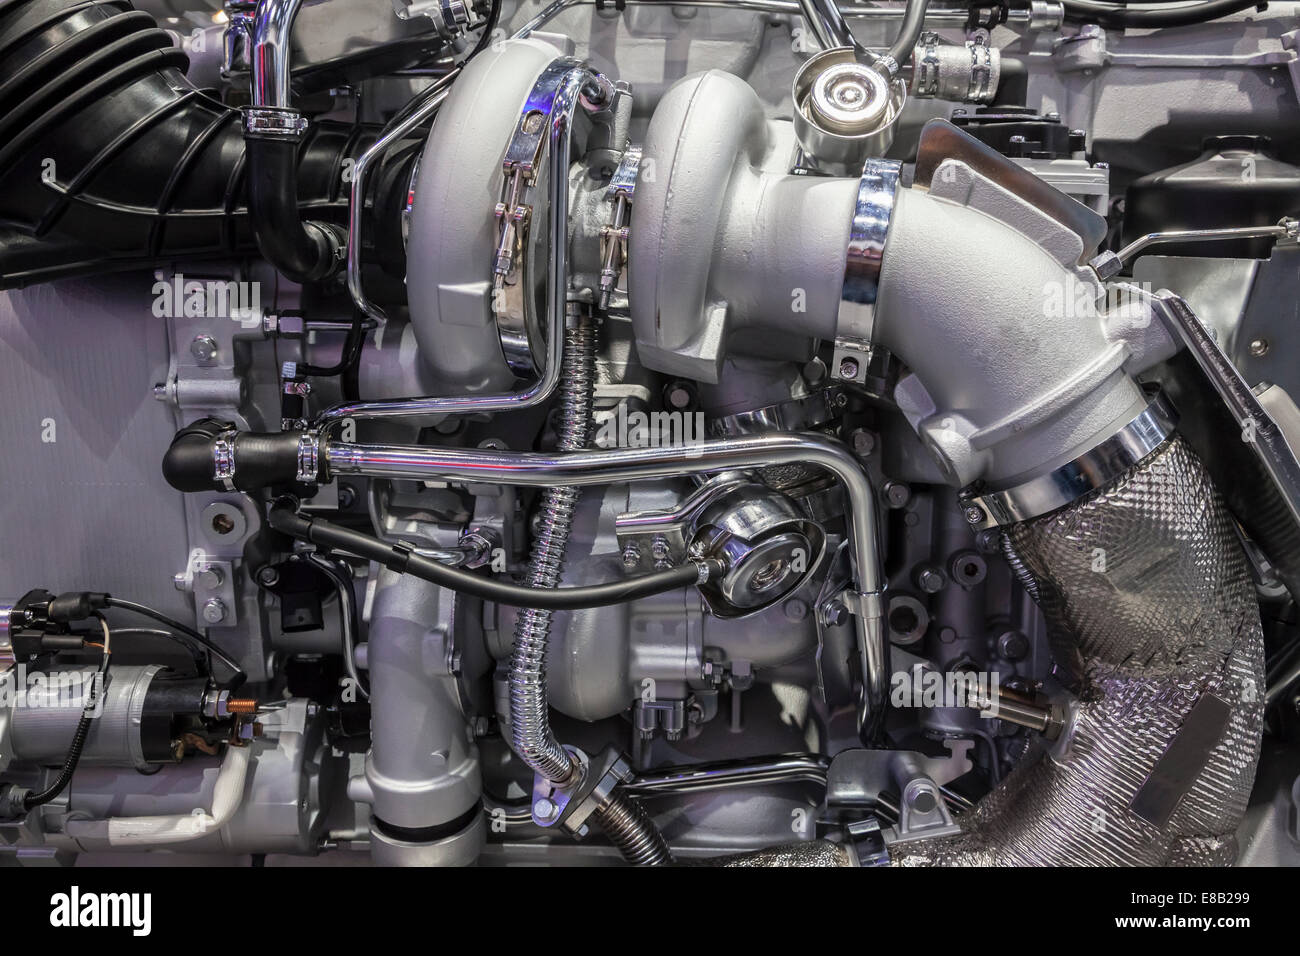 Heavy duty truck turbo diesel engine with two turbochargers Stock Photo -  Alamy